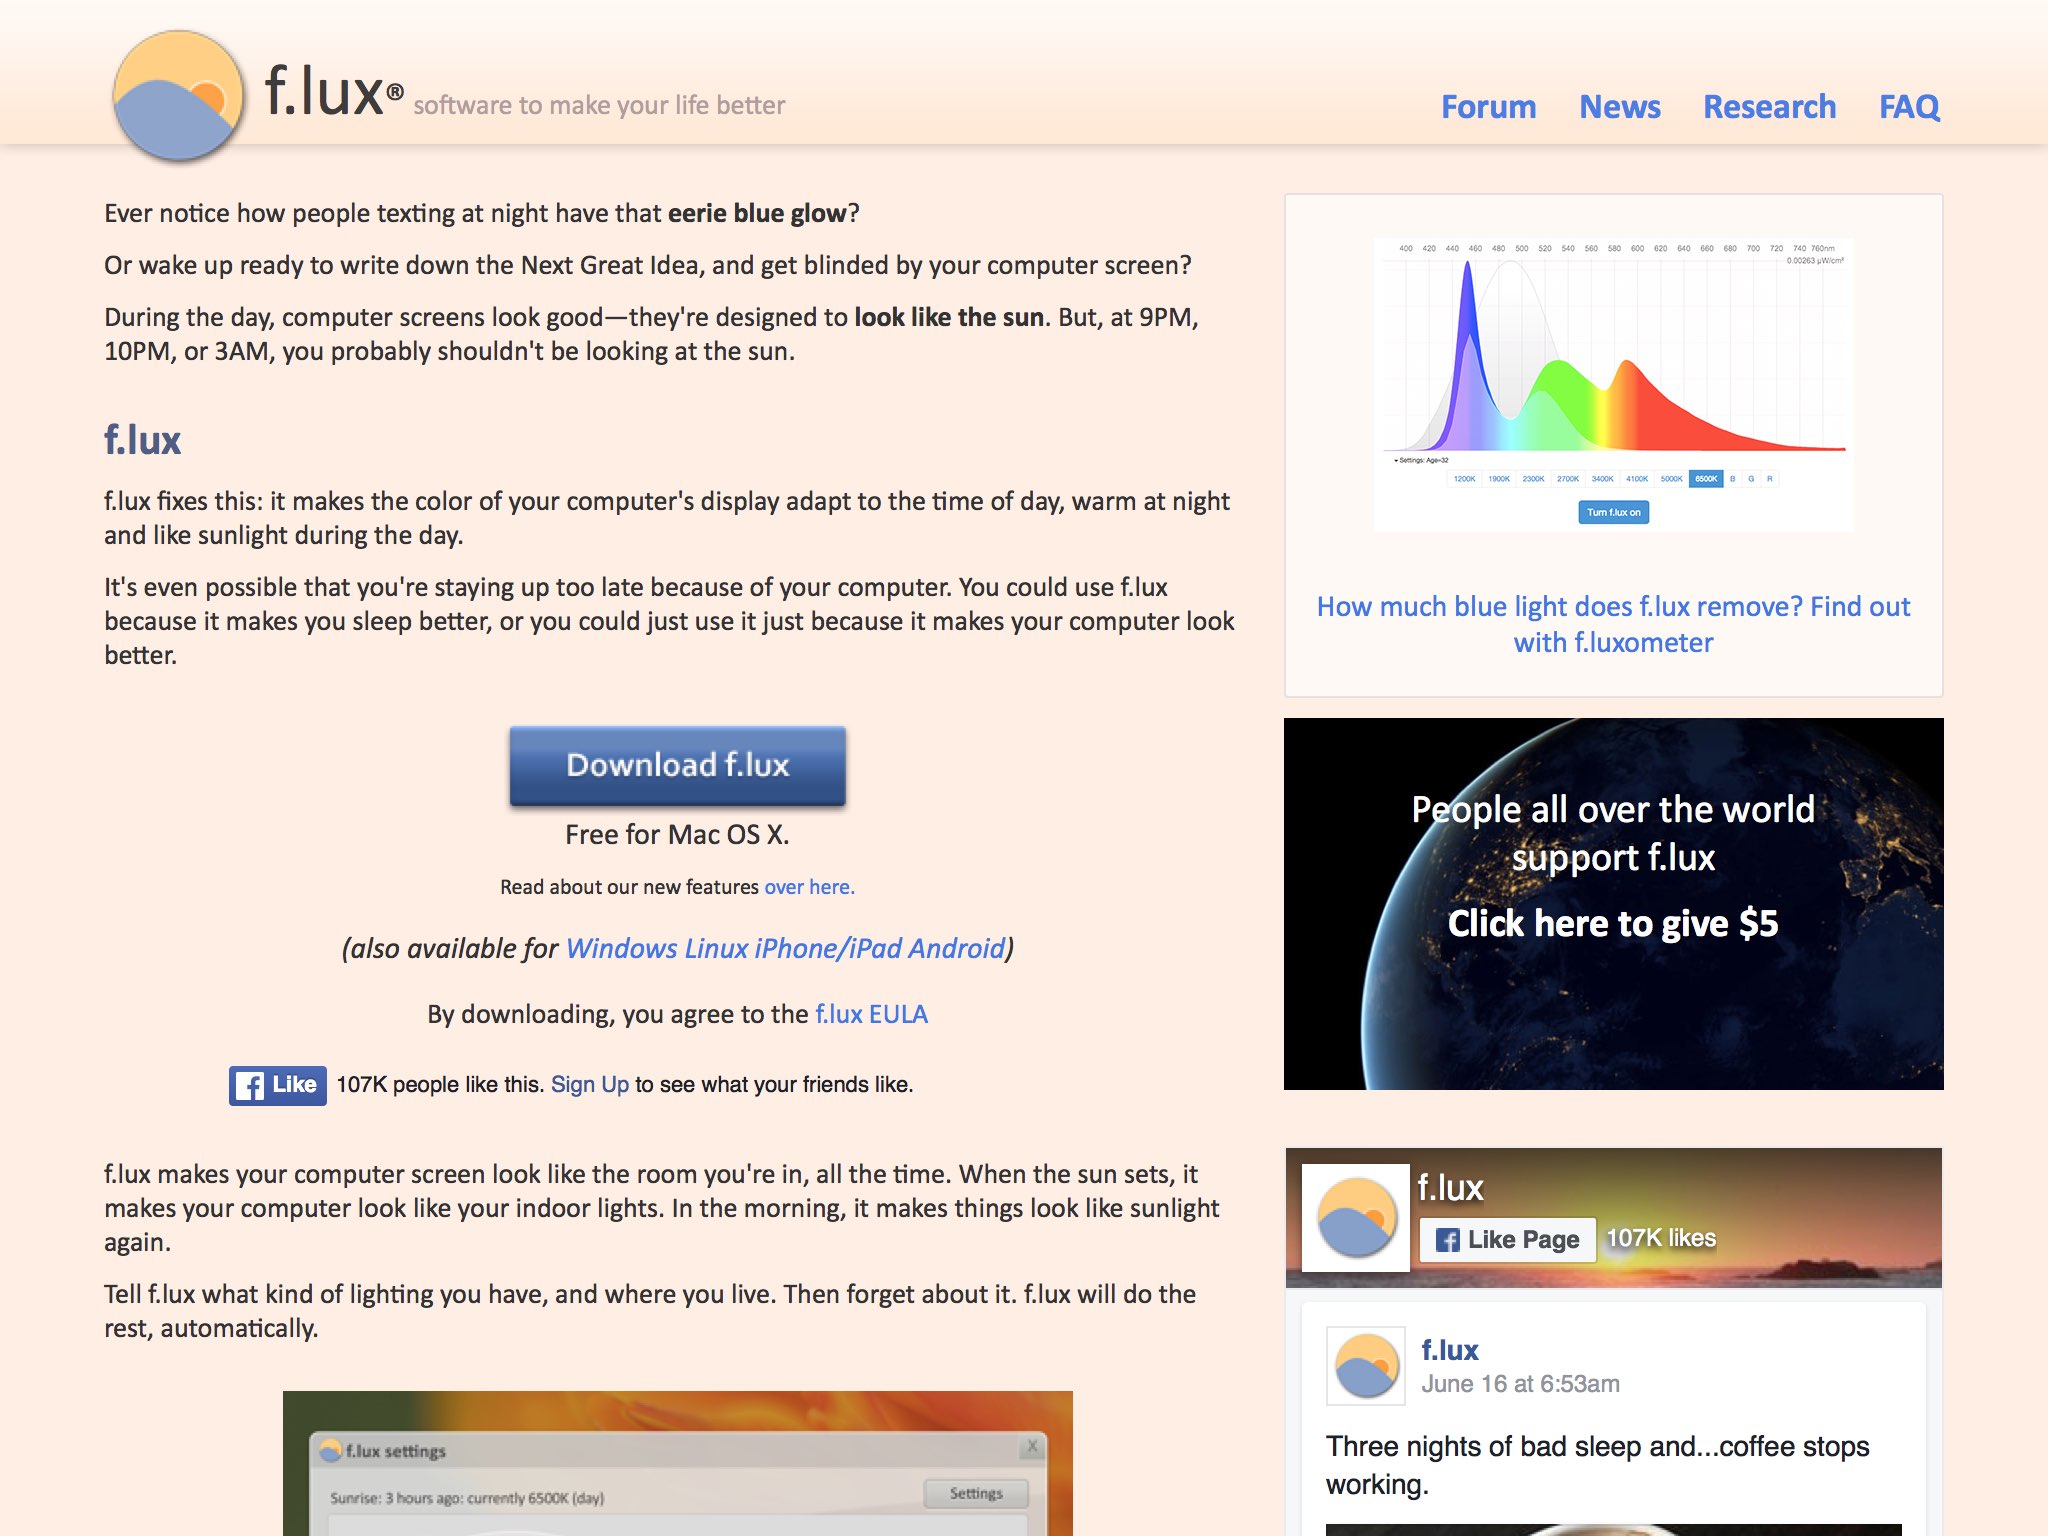 Is your computer keeping you up late? f.lux is free software that warms up your computer display at night, to match your indoor lighting.